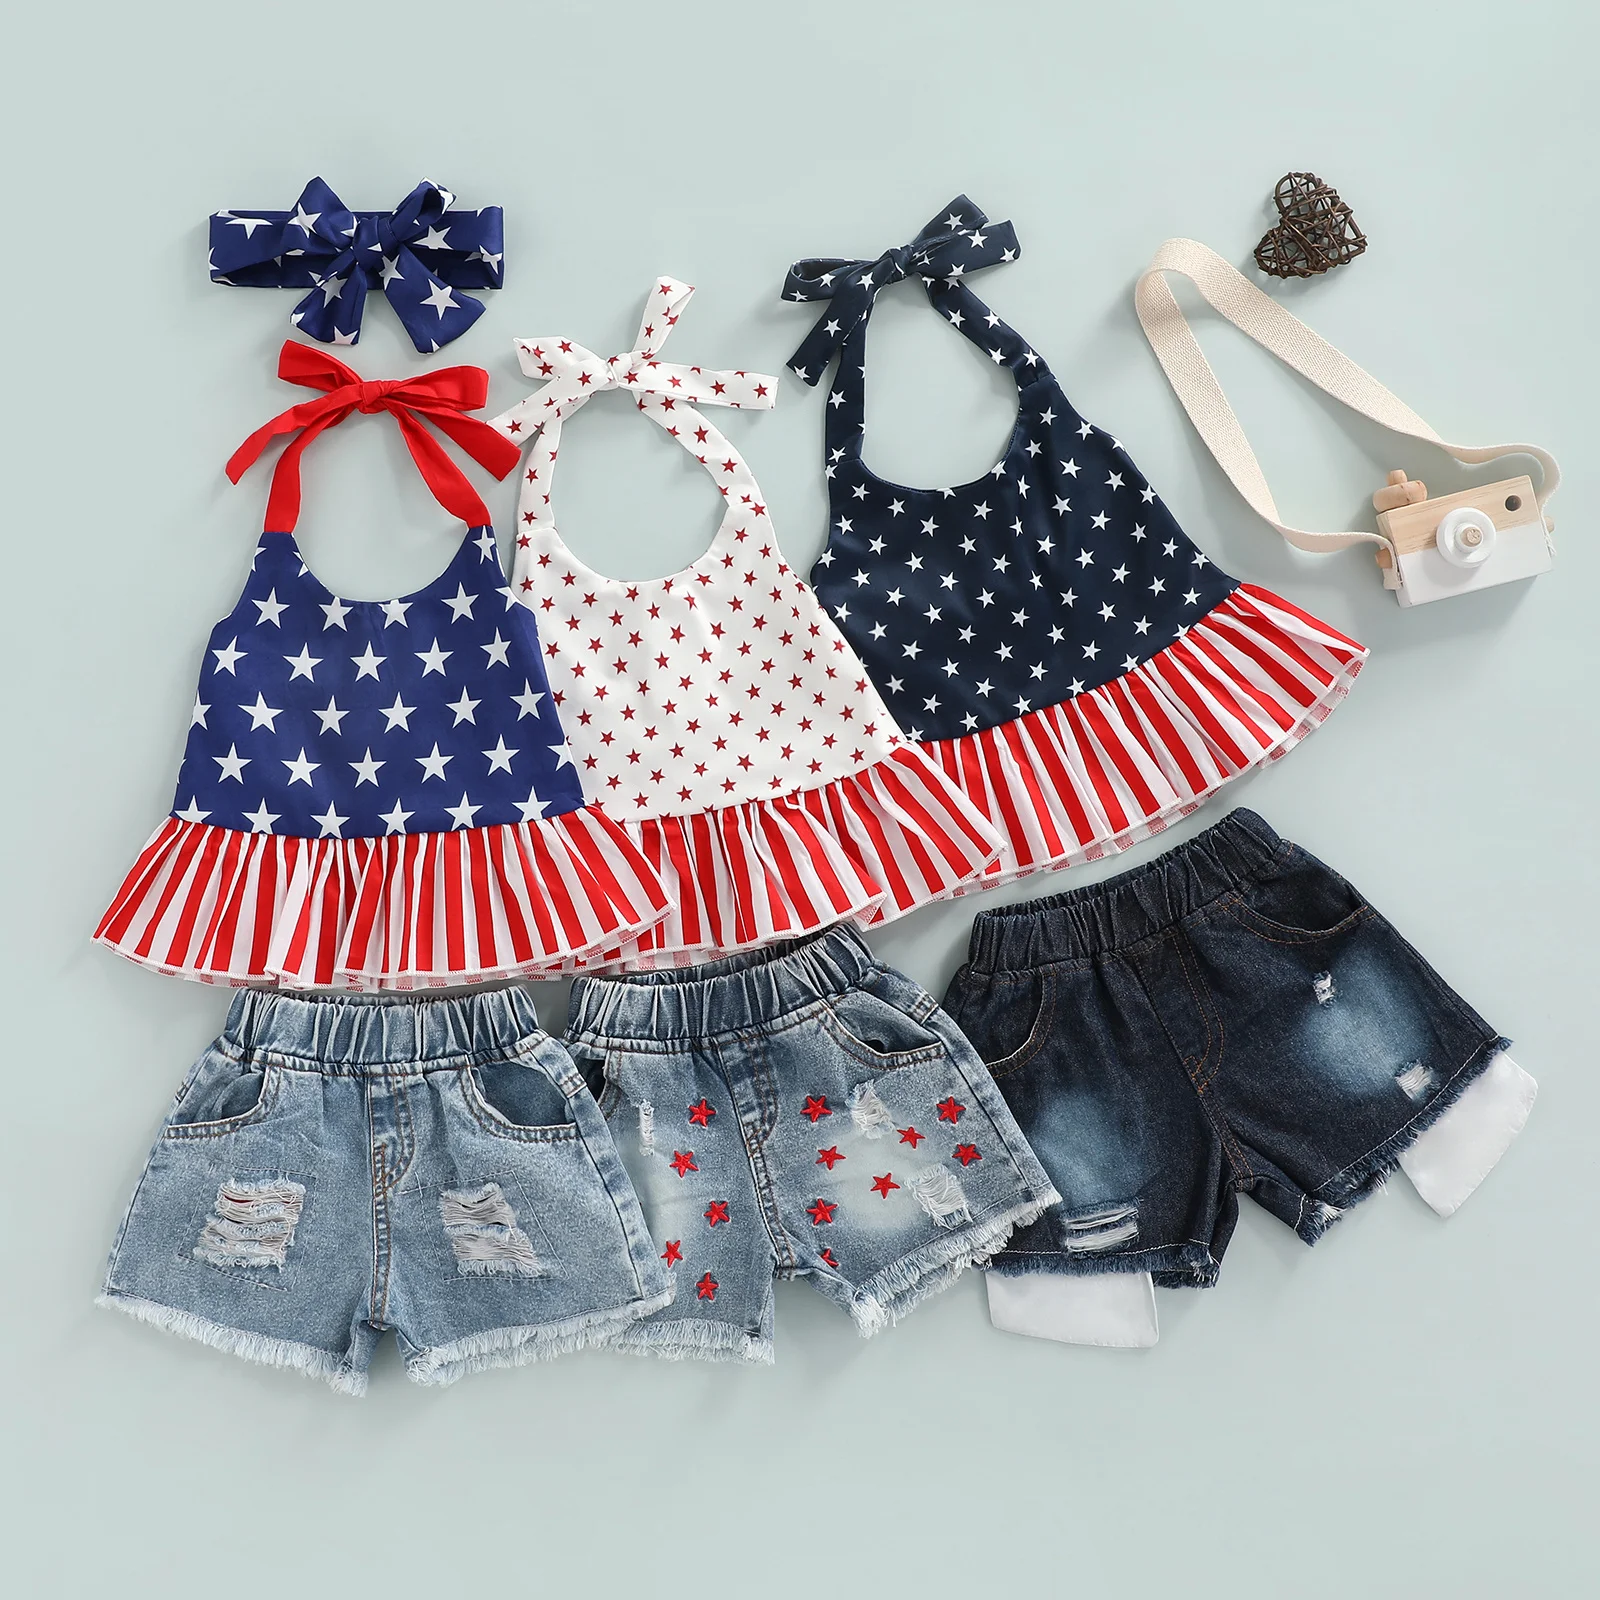 

Citgeett Summer Independence Day Kids Infant Girls Outfits Ruffled Star & Stripe Print Halter Tops + Ripped Jeans Clothes Set